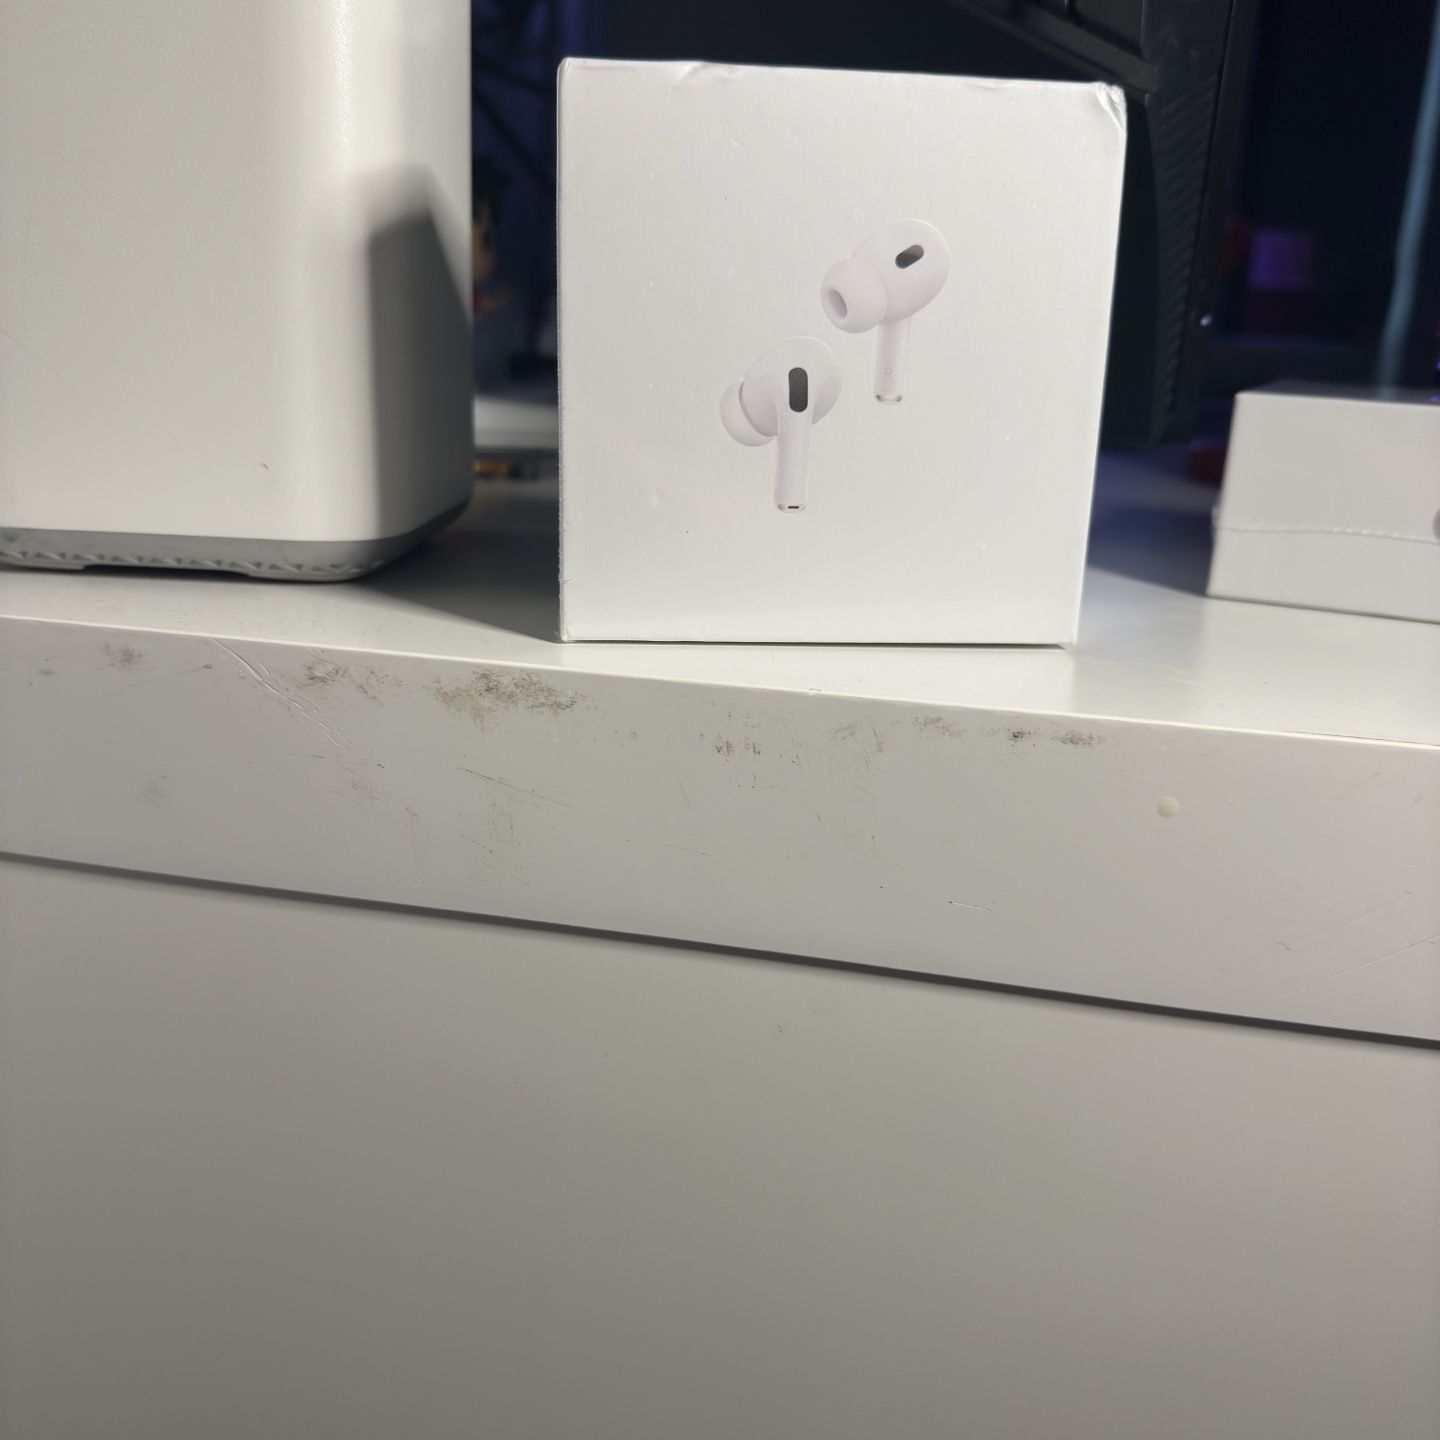 Airpod pros generation 2, Brand New, Box Included 